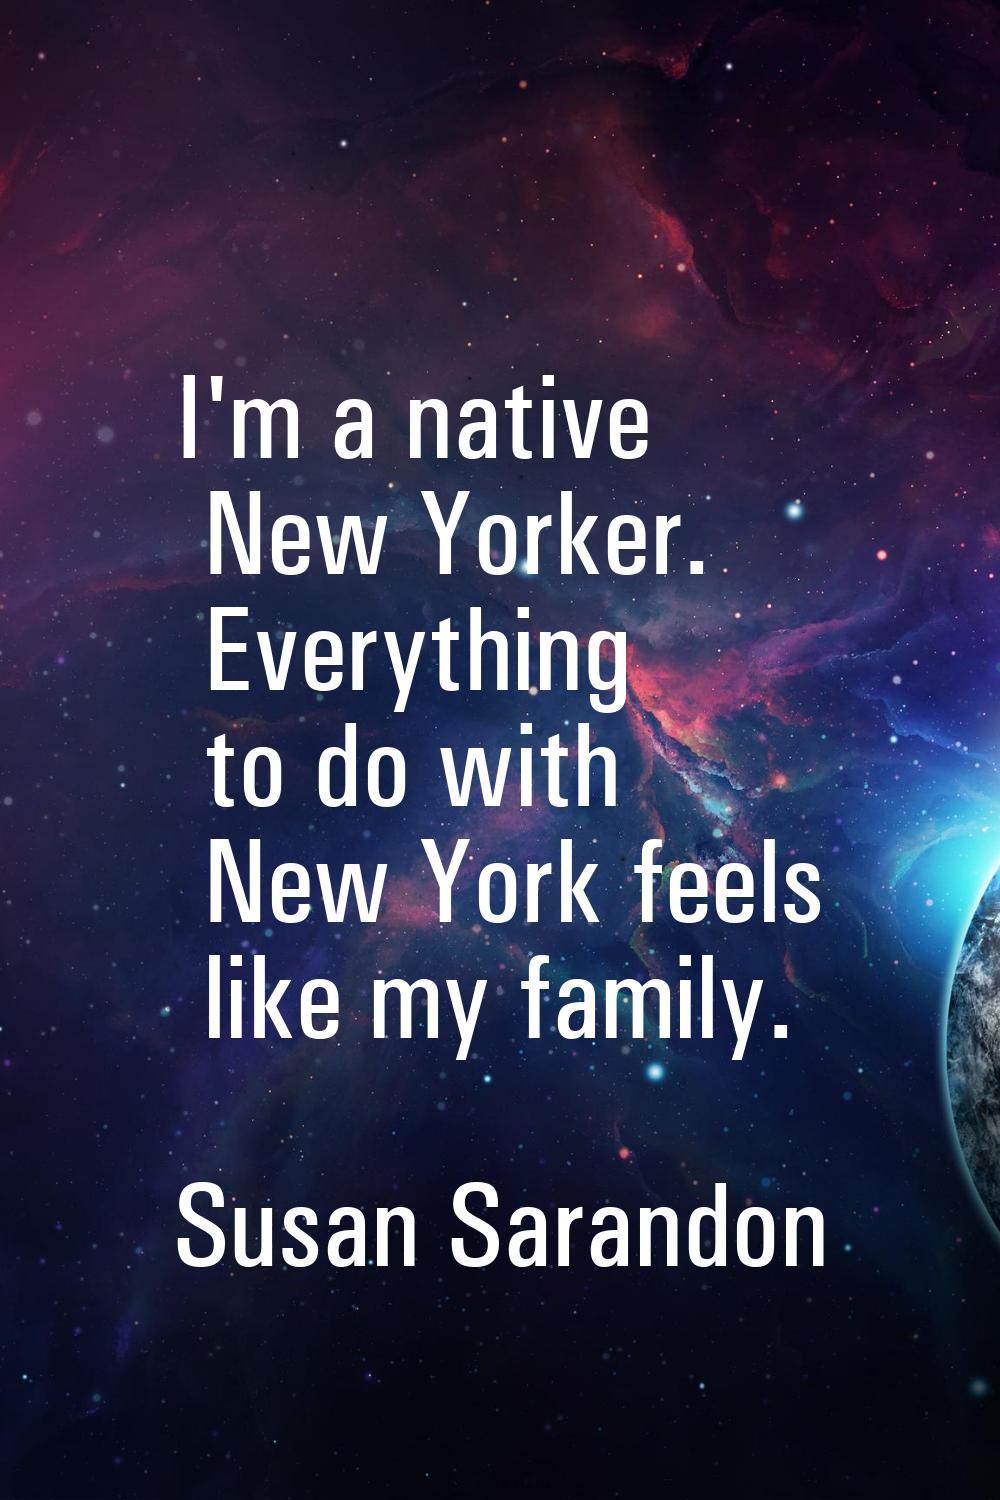 I'm a native New Yorker. Everything to do with New York feels like my family.